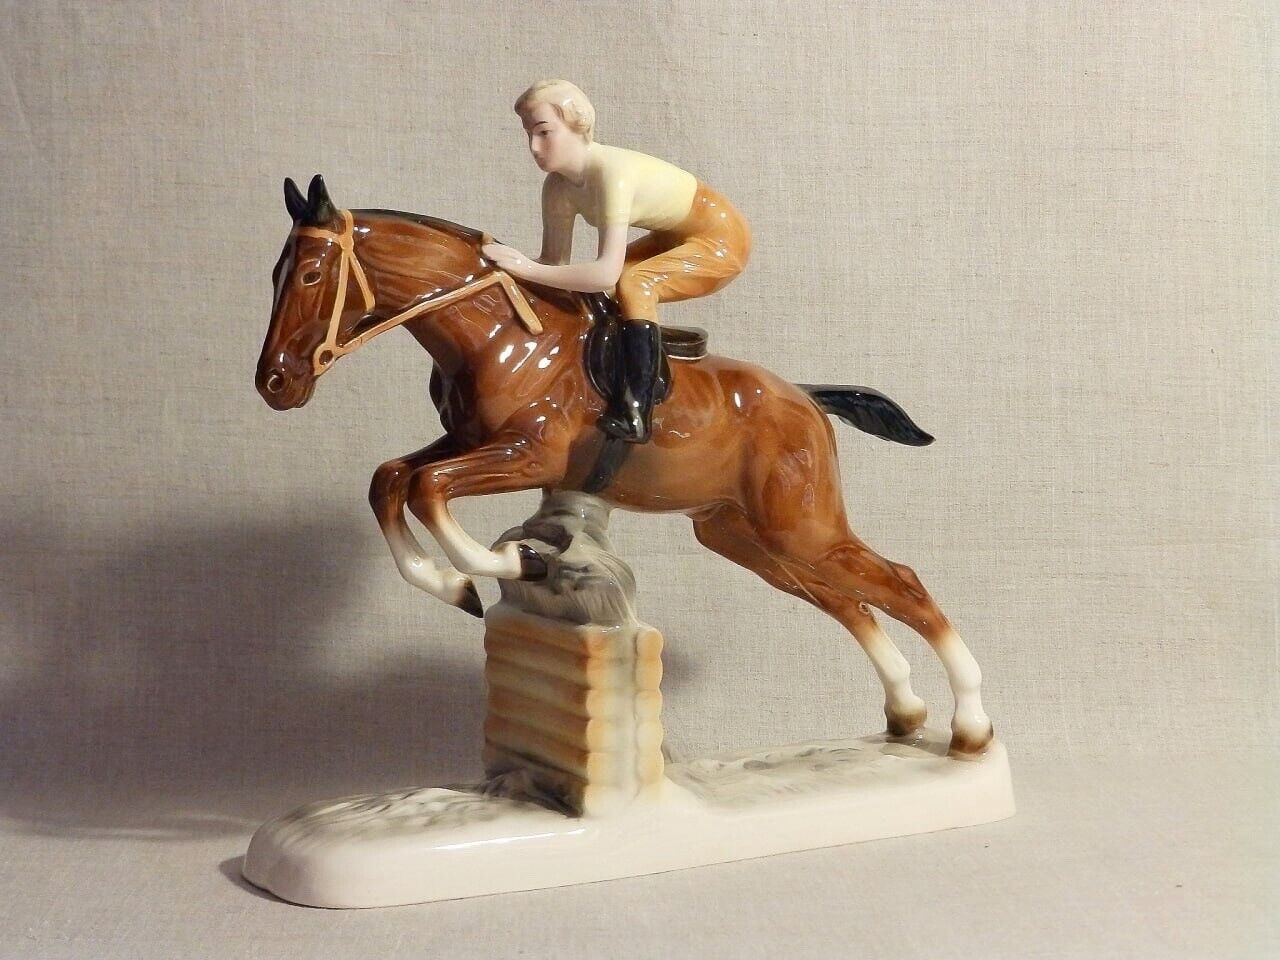 RARE Figurine “RIDER GIRL ON A HORSE” Hertwig Karzhutte 1940s Germany Porcelain